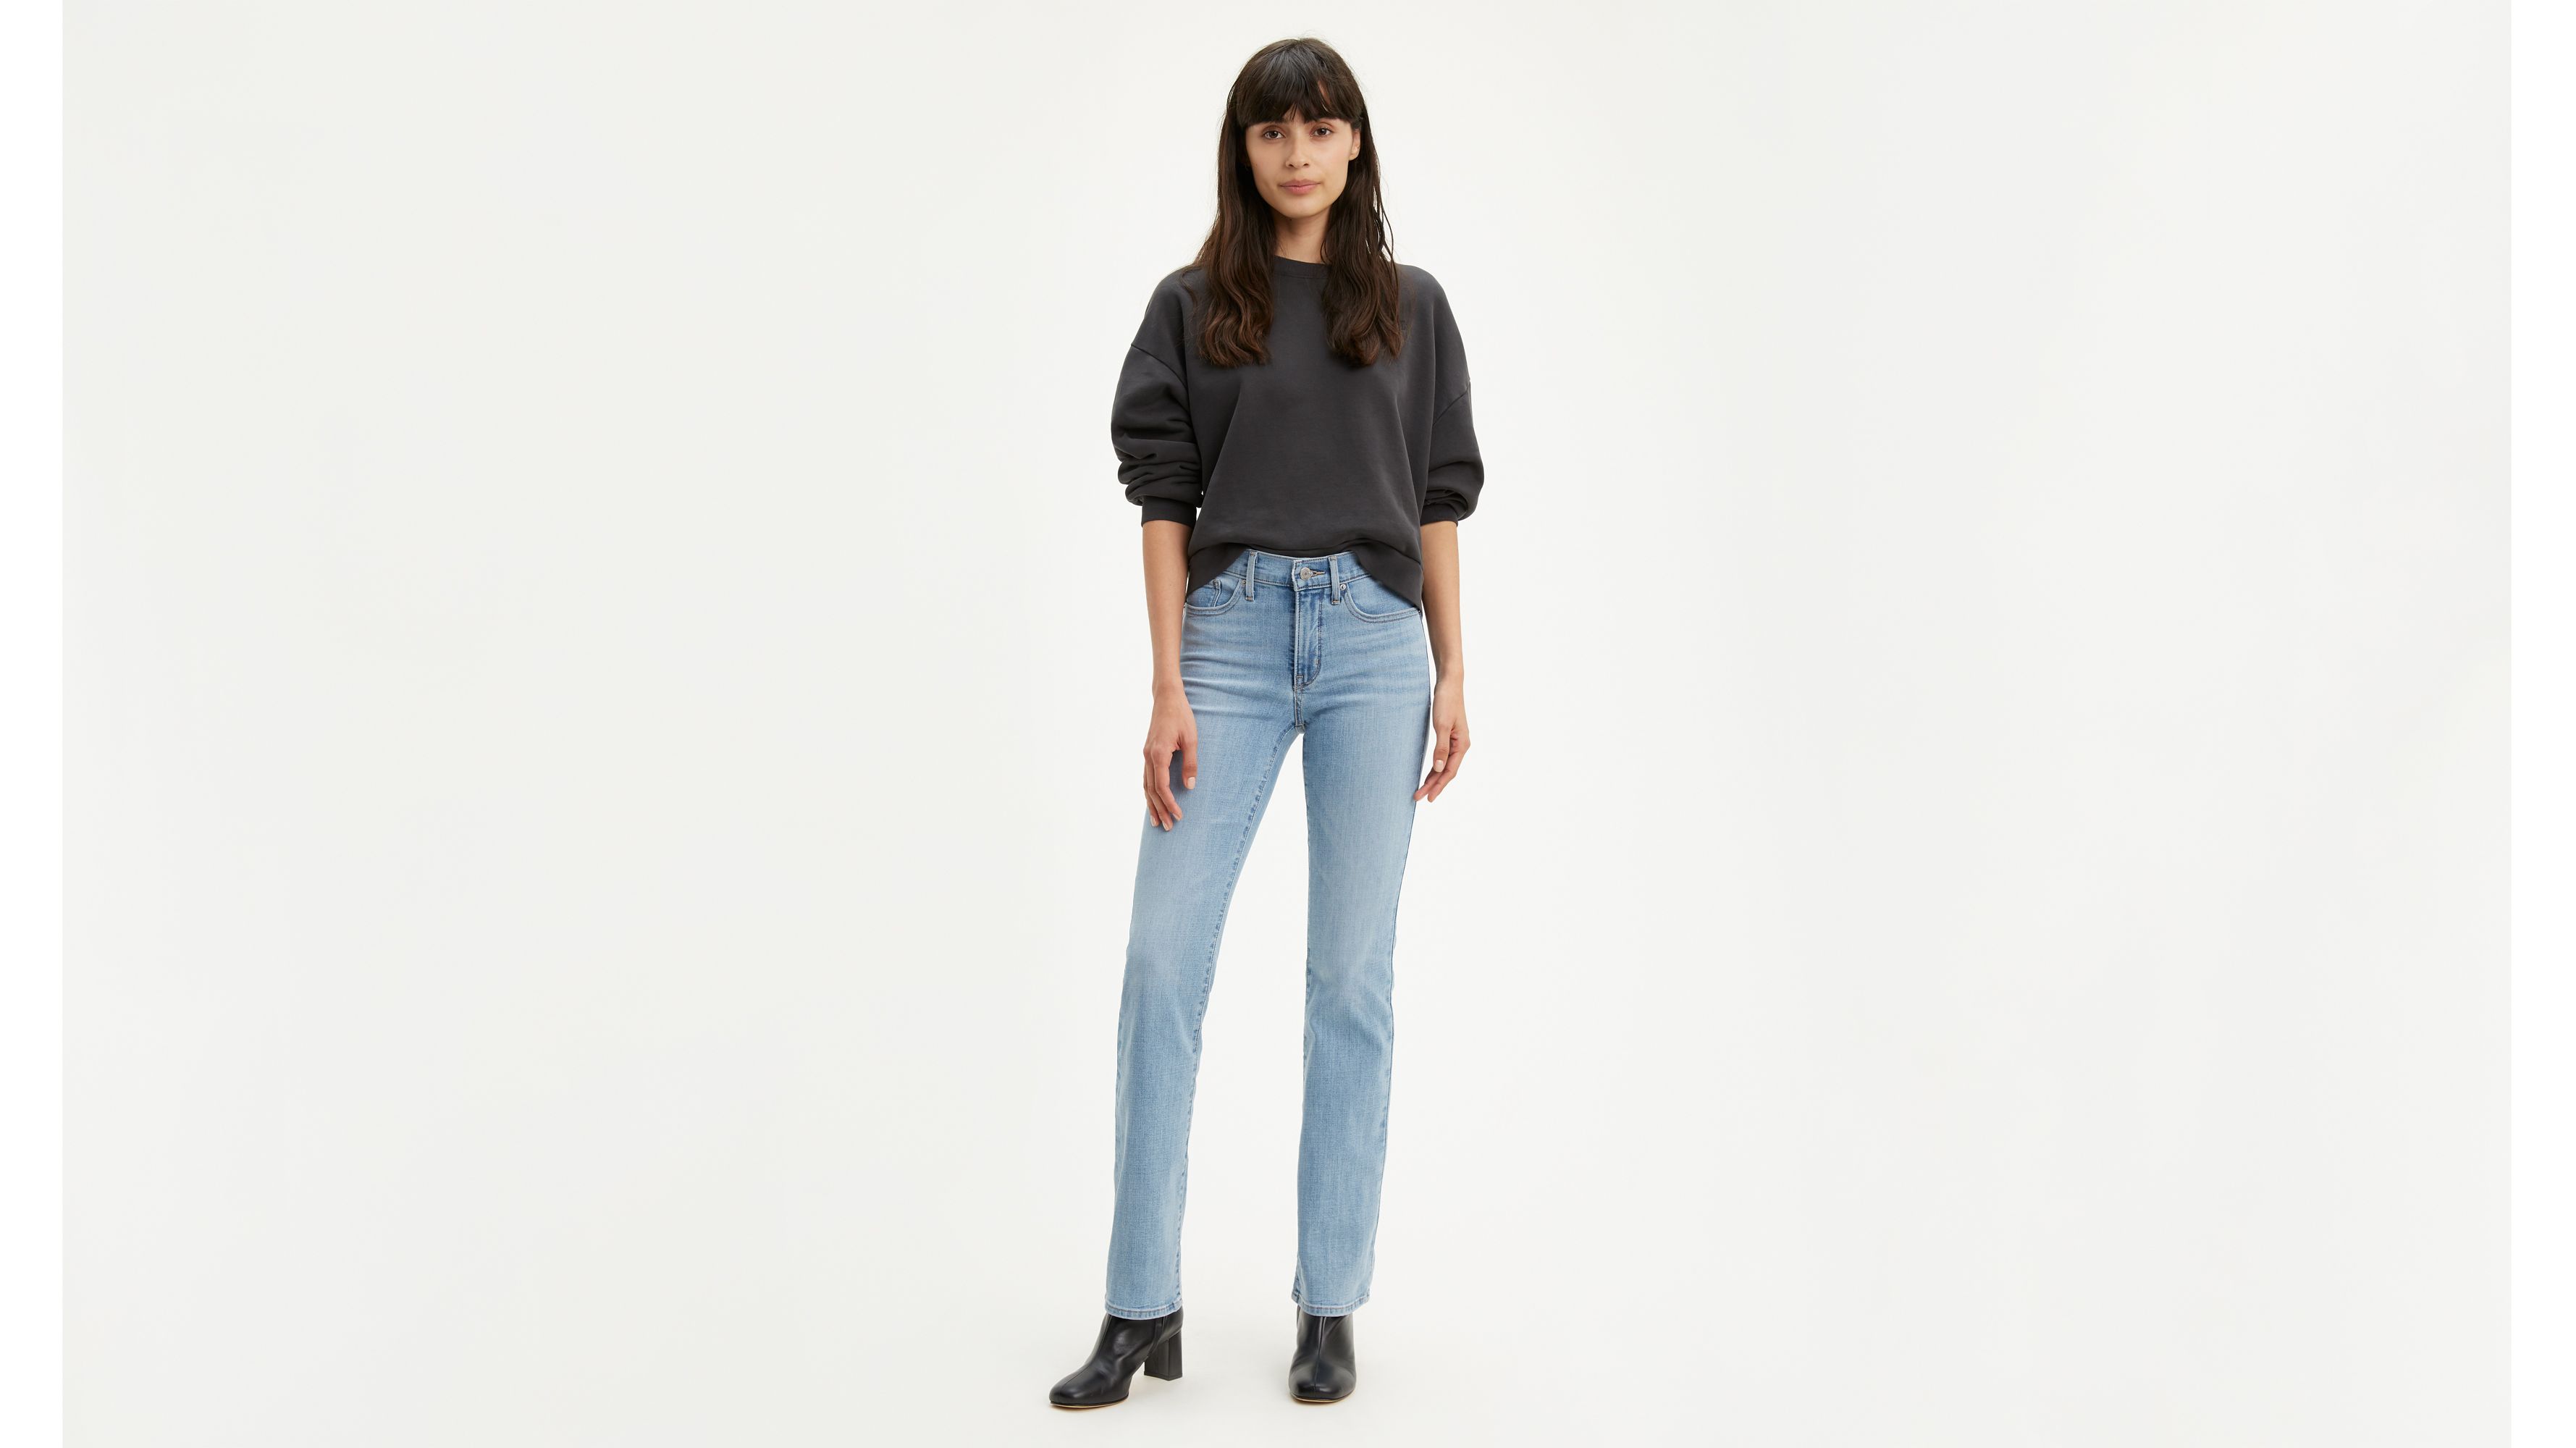 levi 315 shaping boot cut jeans